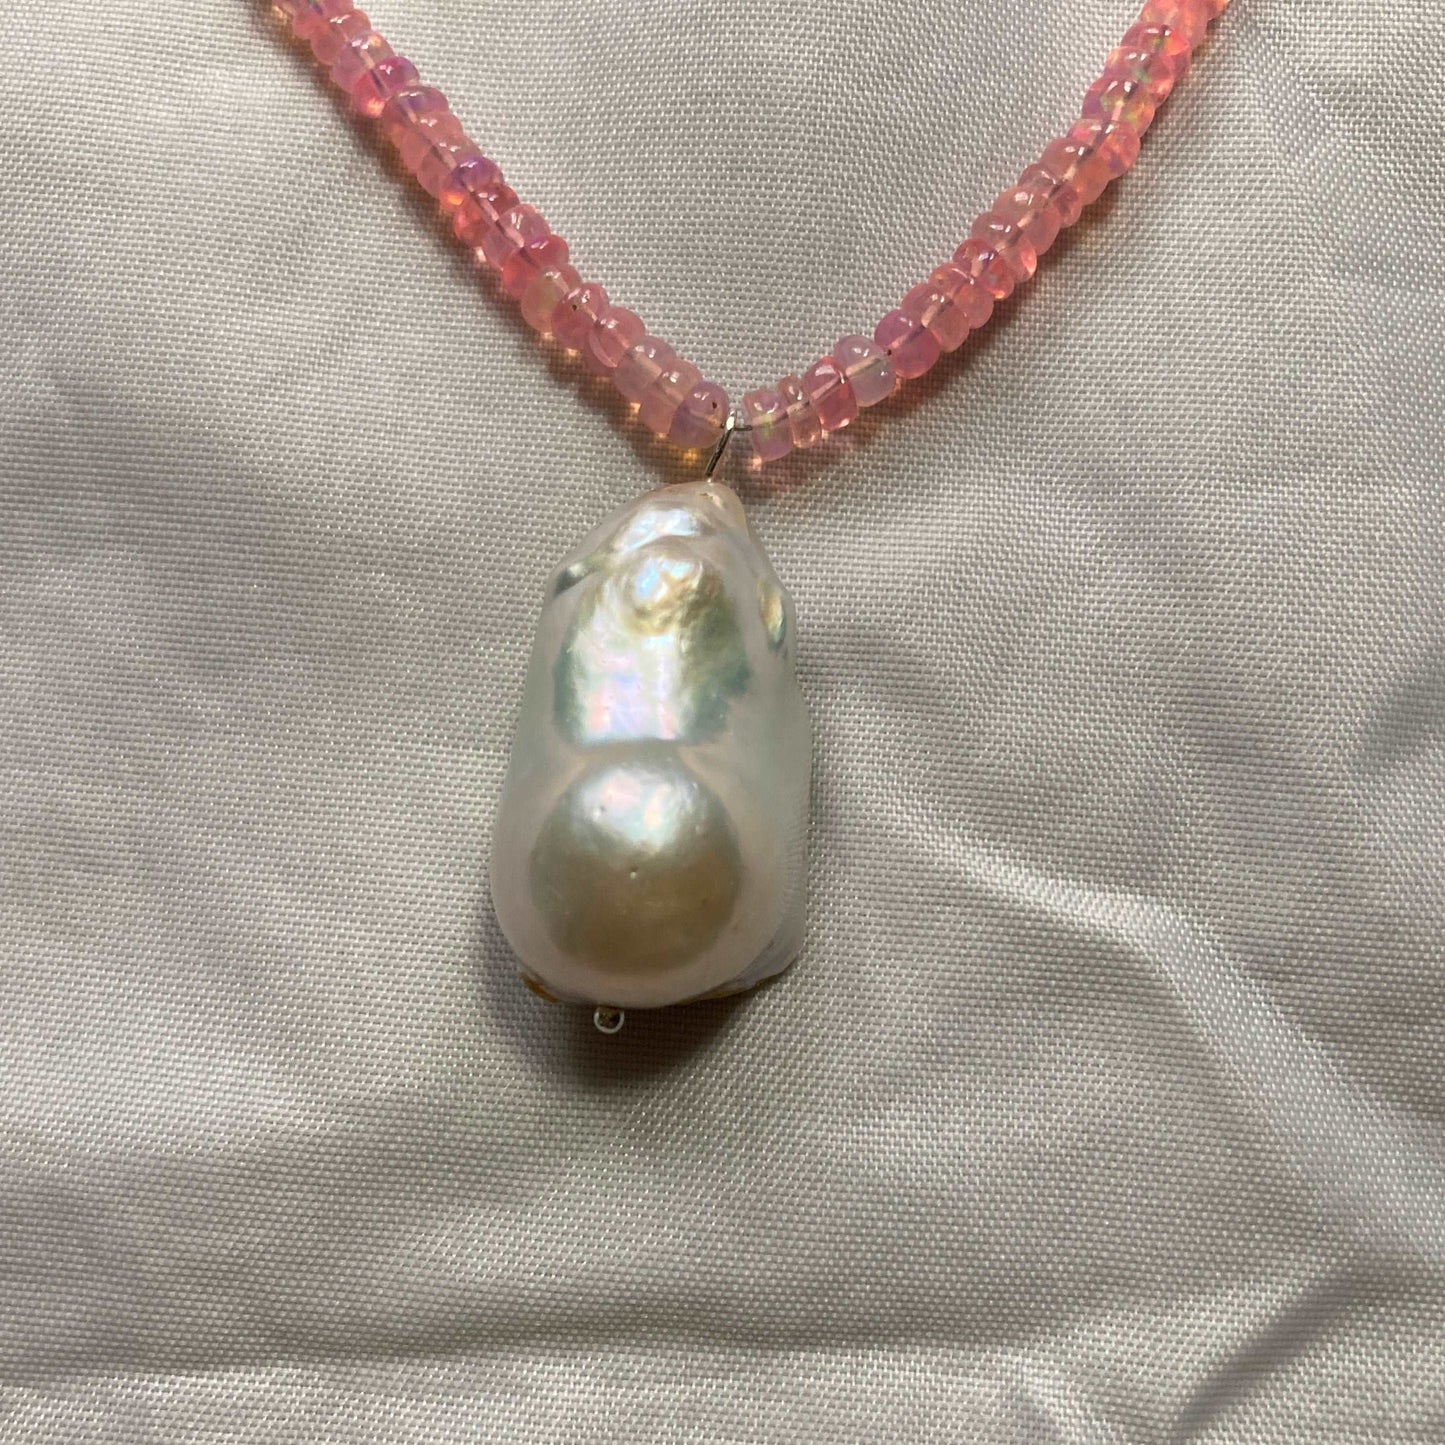 rear view of necklace